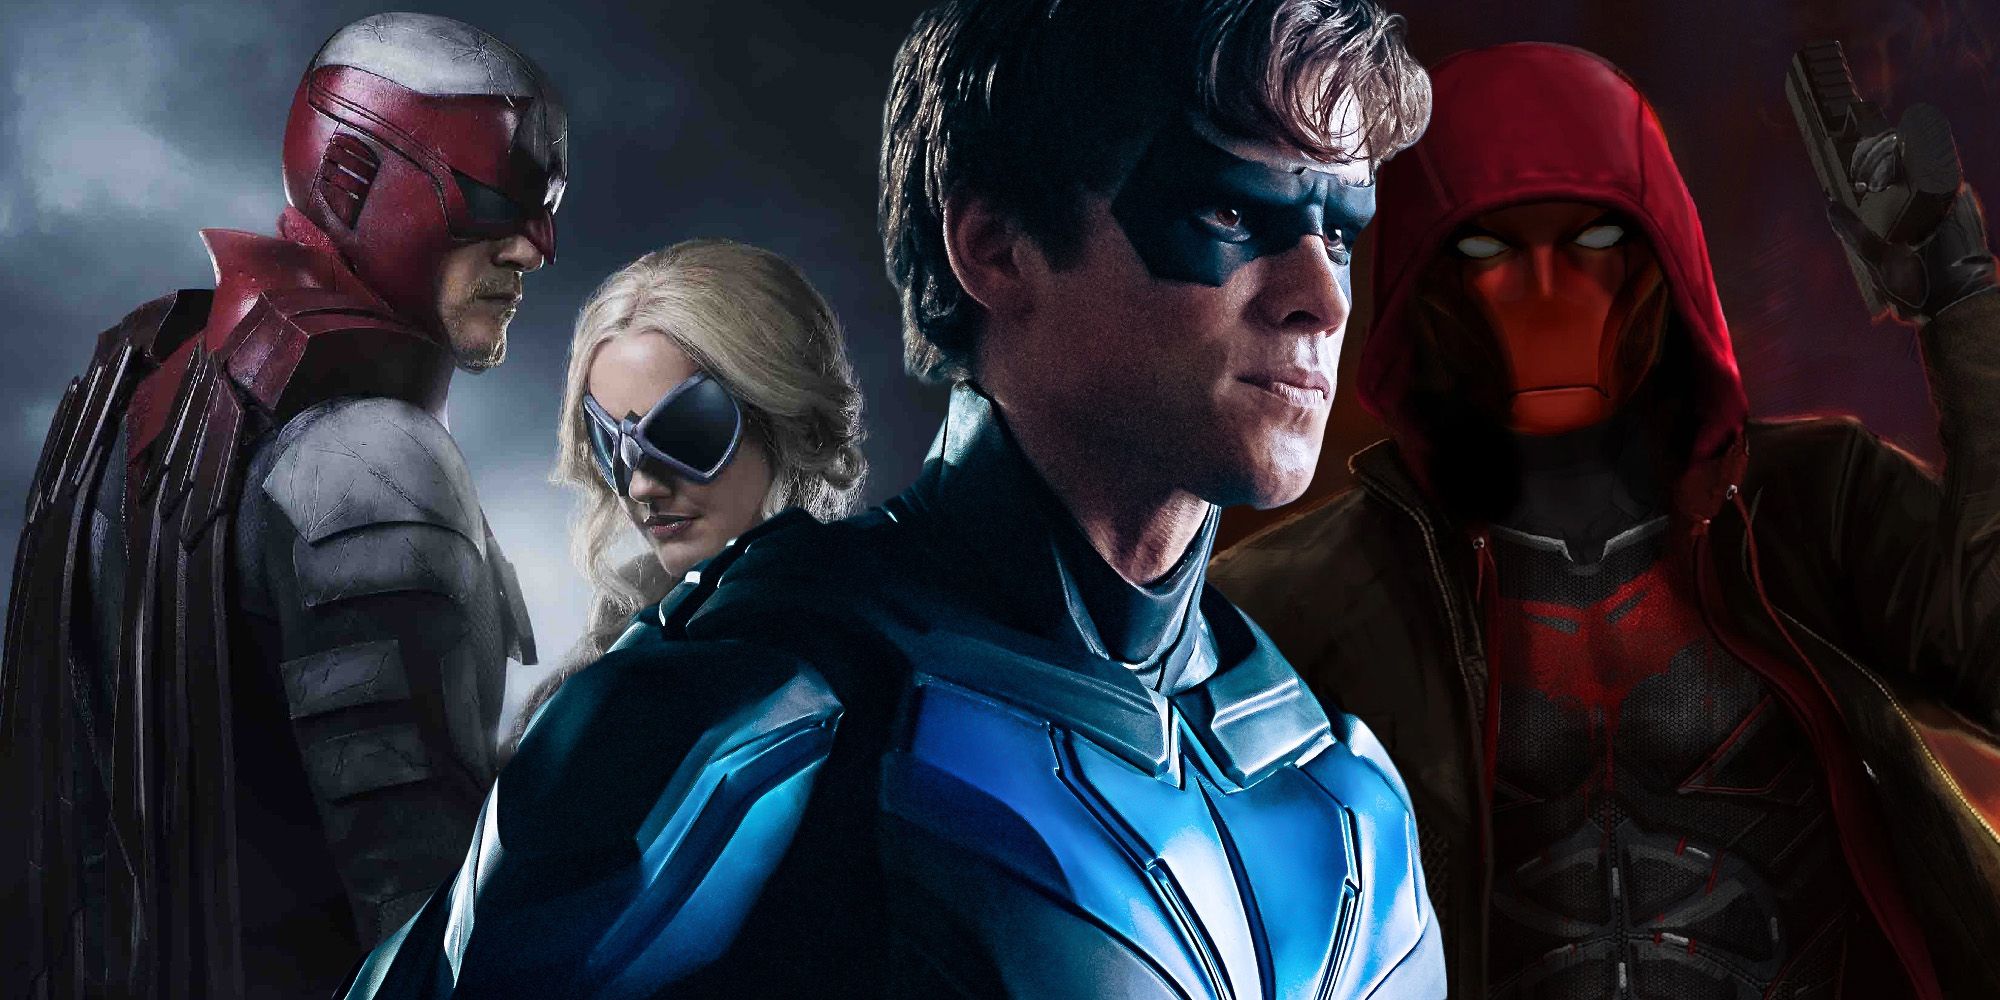 Custom image of Titan's Nightwing over Redhood, Hawk, and Dove